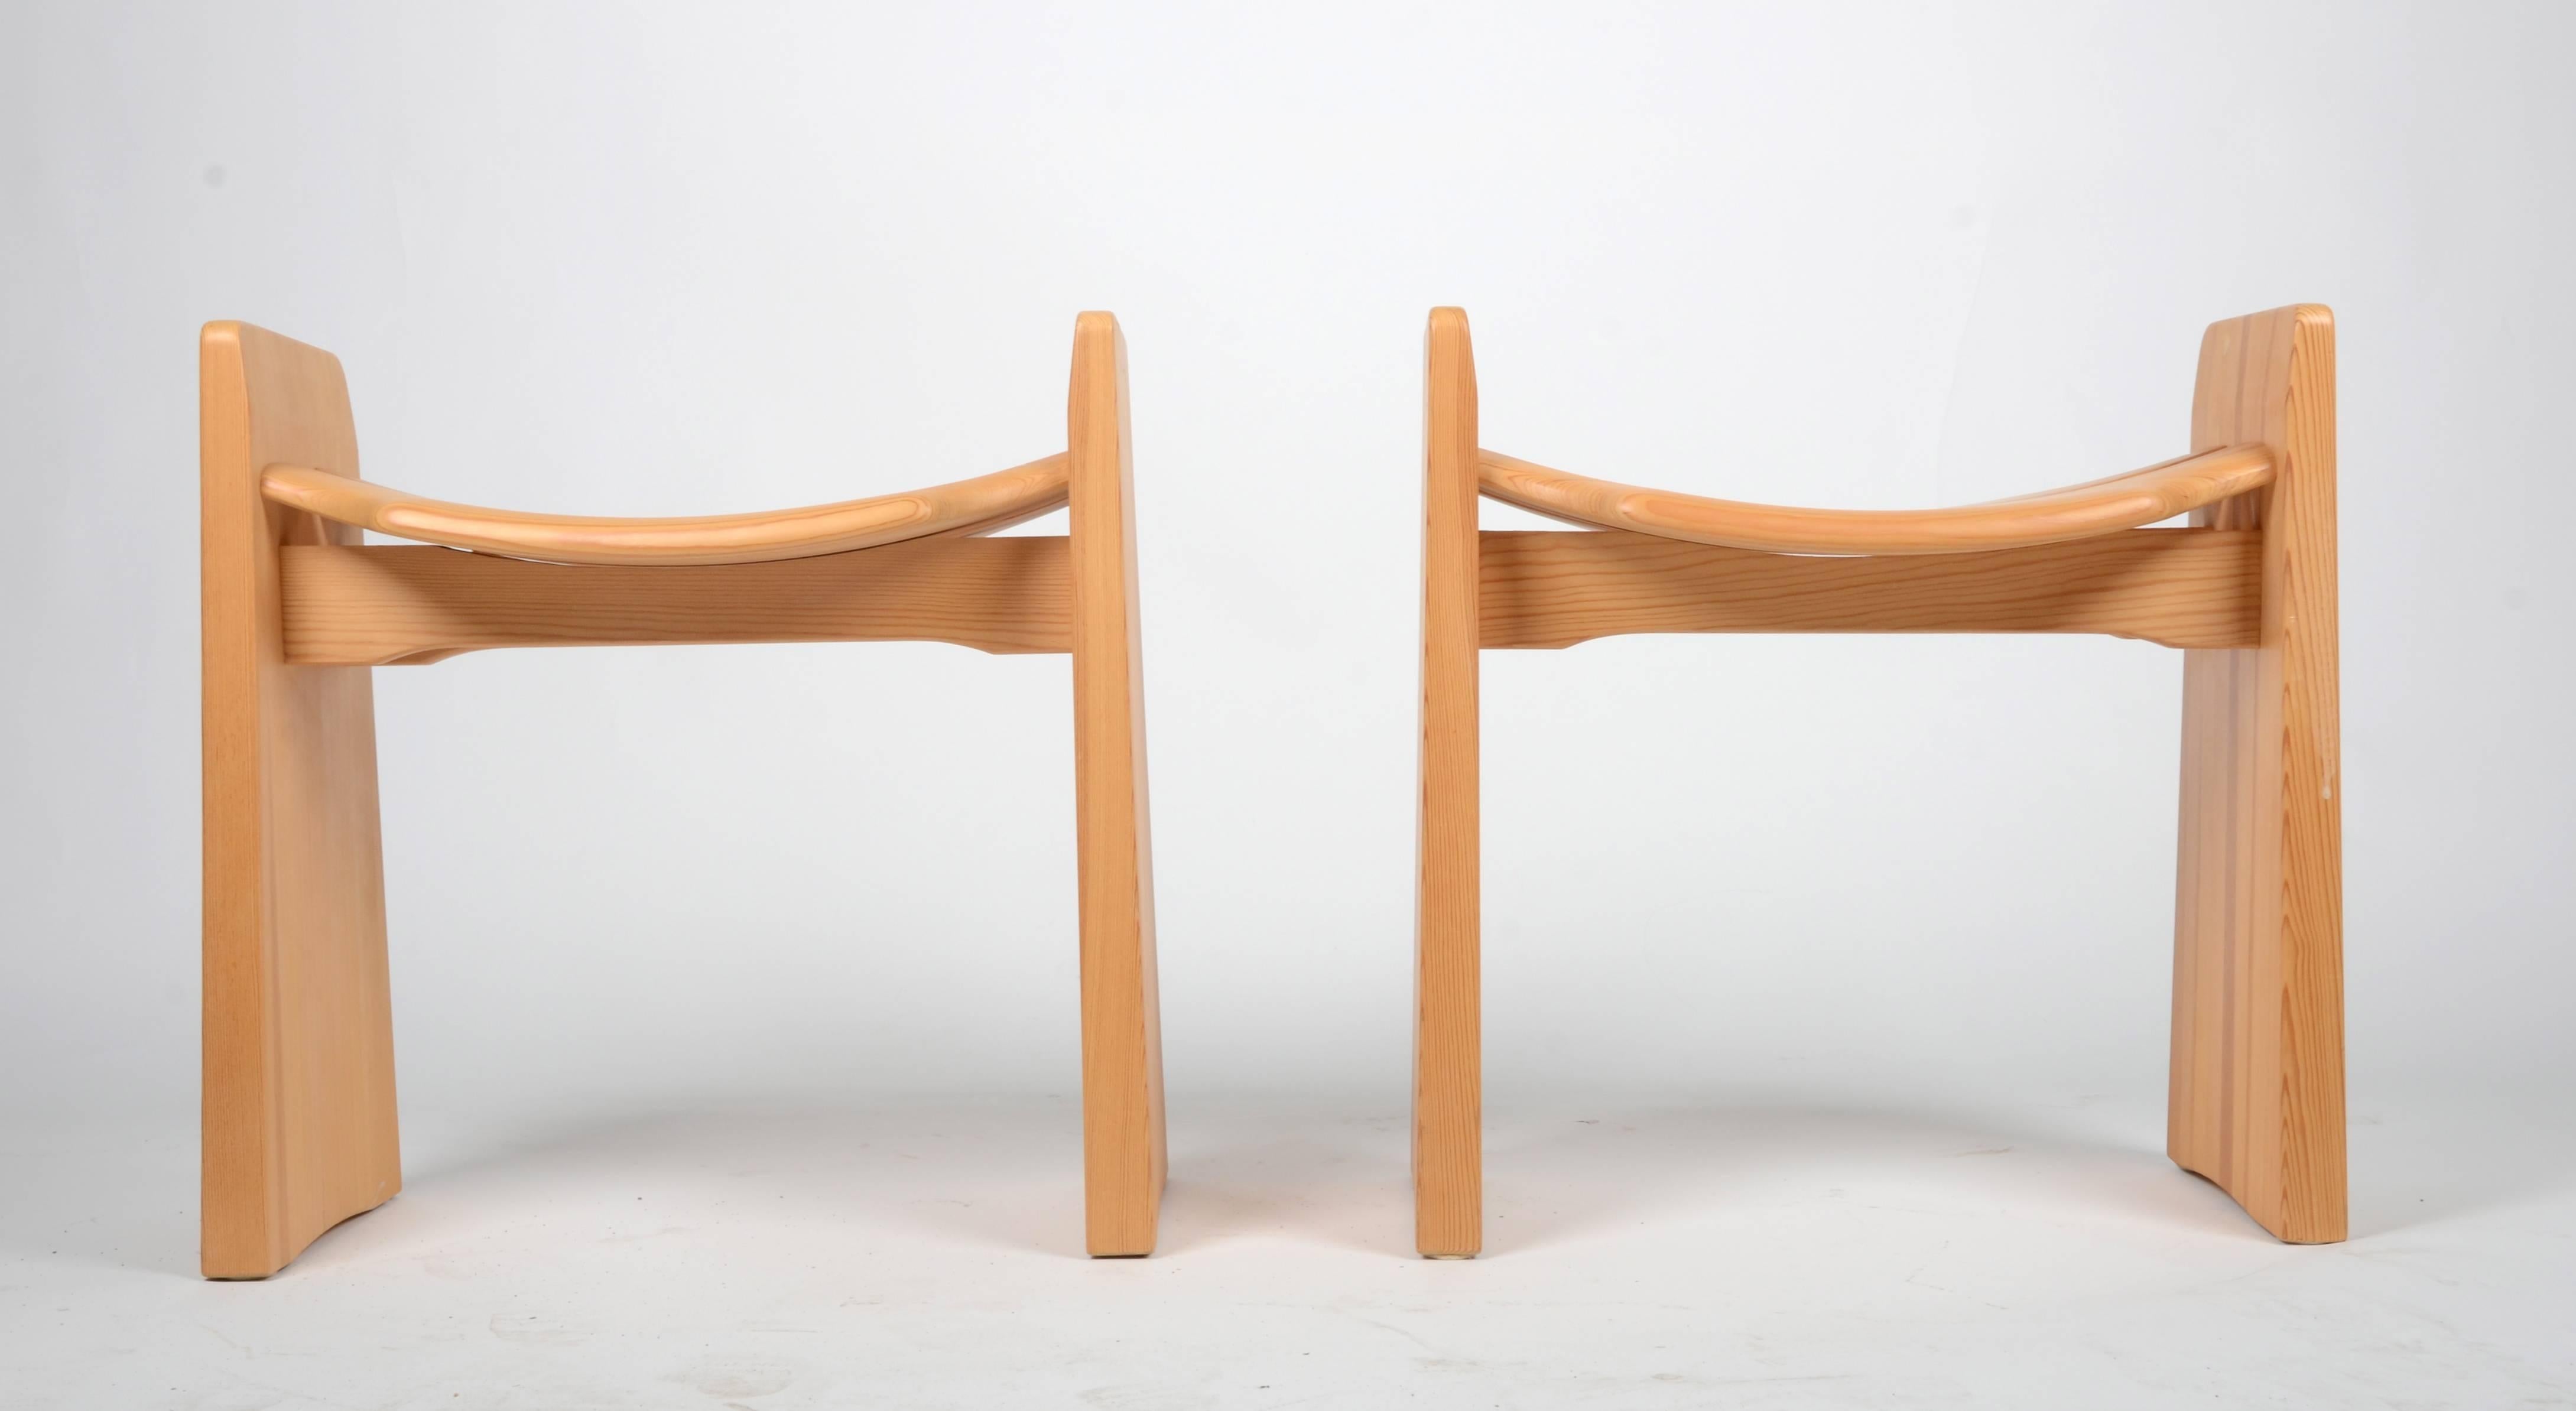 A pair of stools in beech, made in Sweden, mid-1900s.